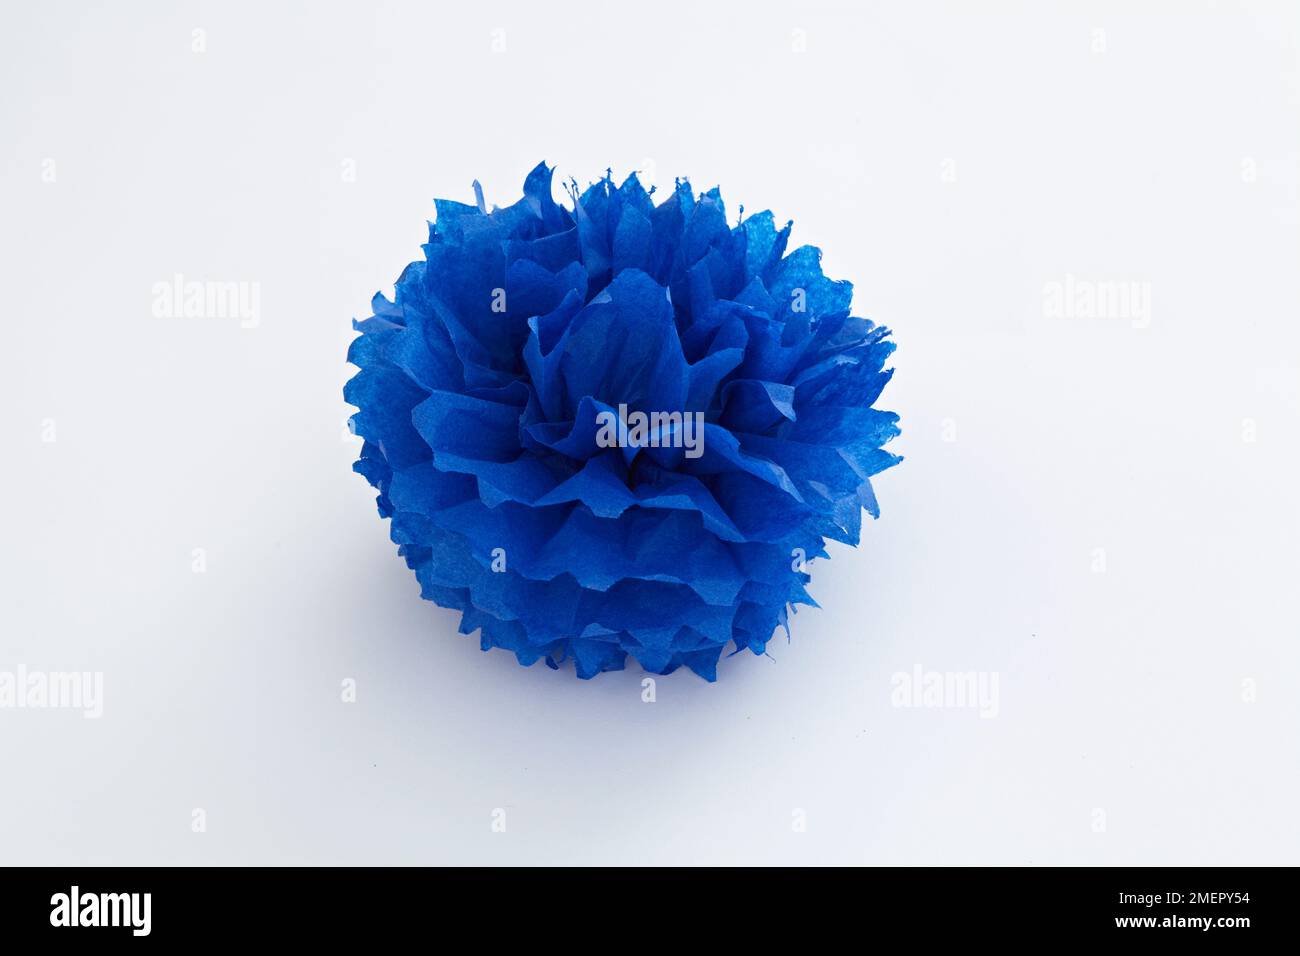 Blue Tissue Paper Background Stock Image - Image of tissues, photograph:  90566661